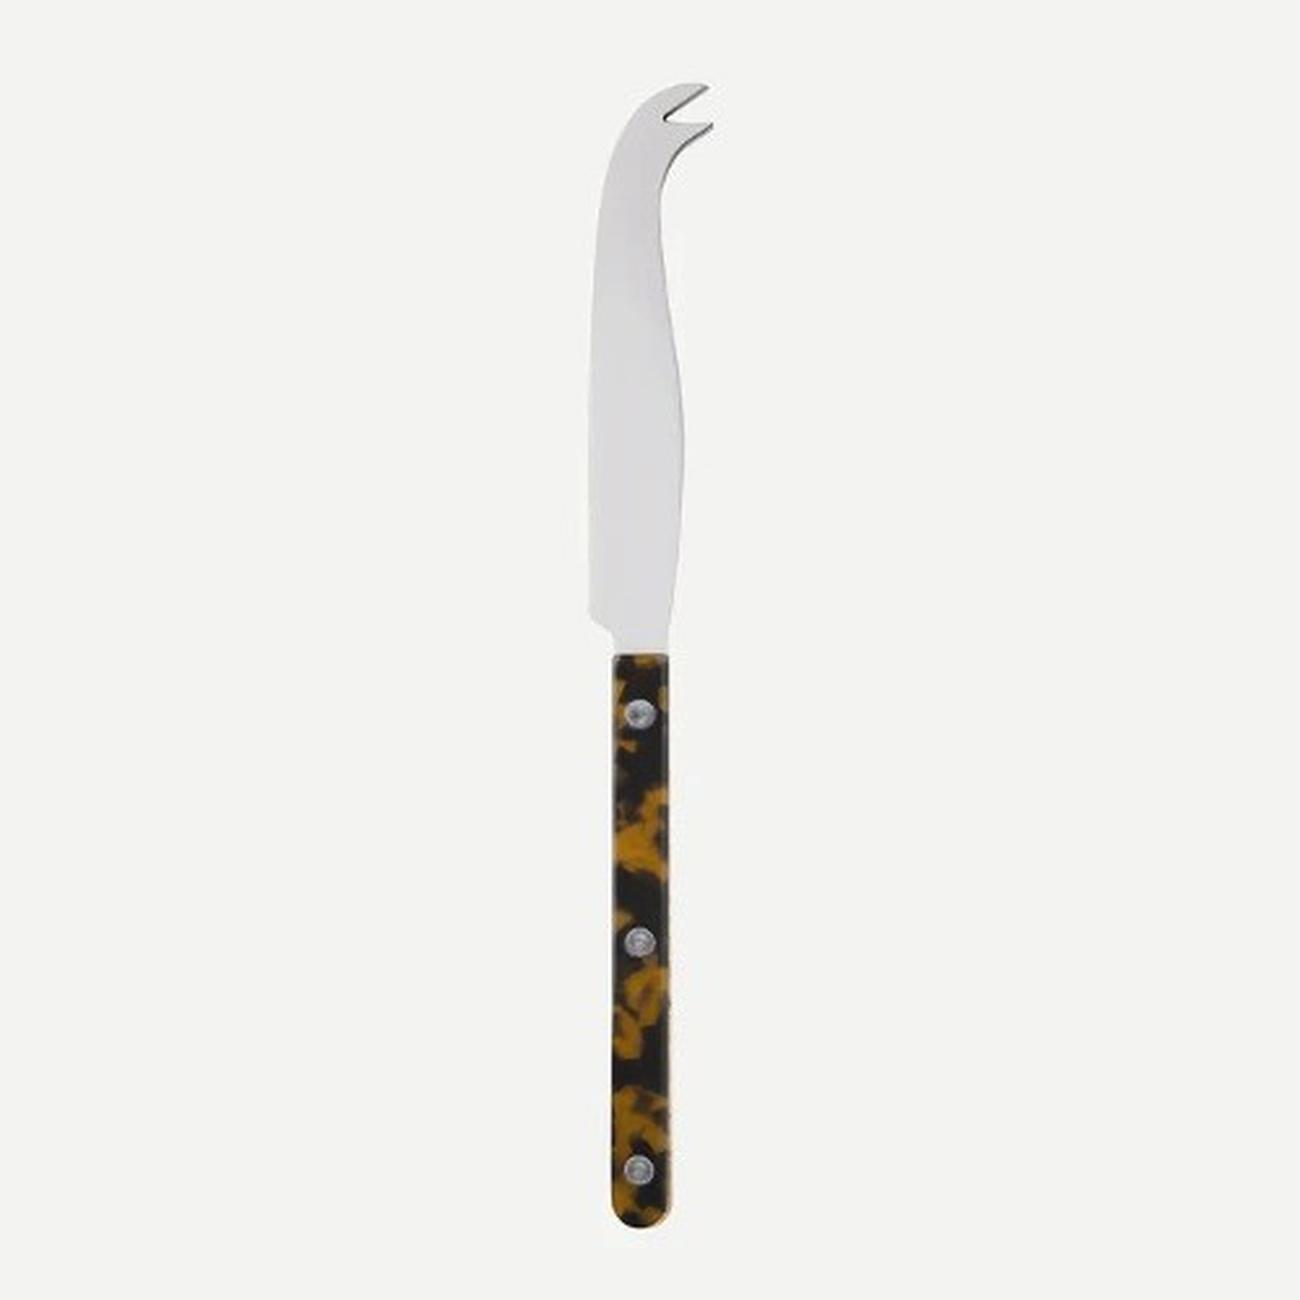 sabre-bistrot-cheese-knife-faux-tortoise - Sabre Bistrot Cheese Knife- Faux Tortoise